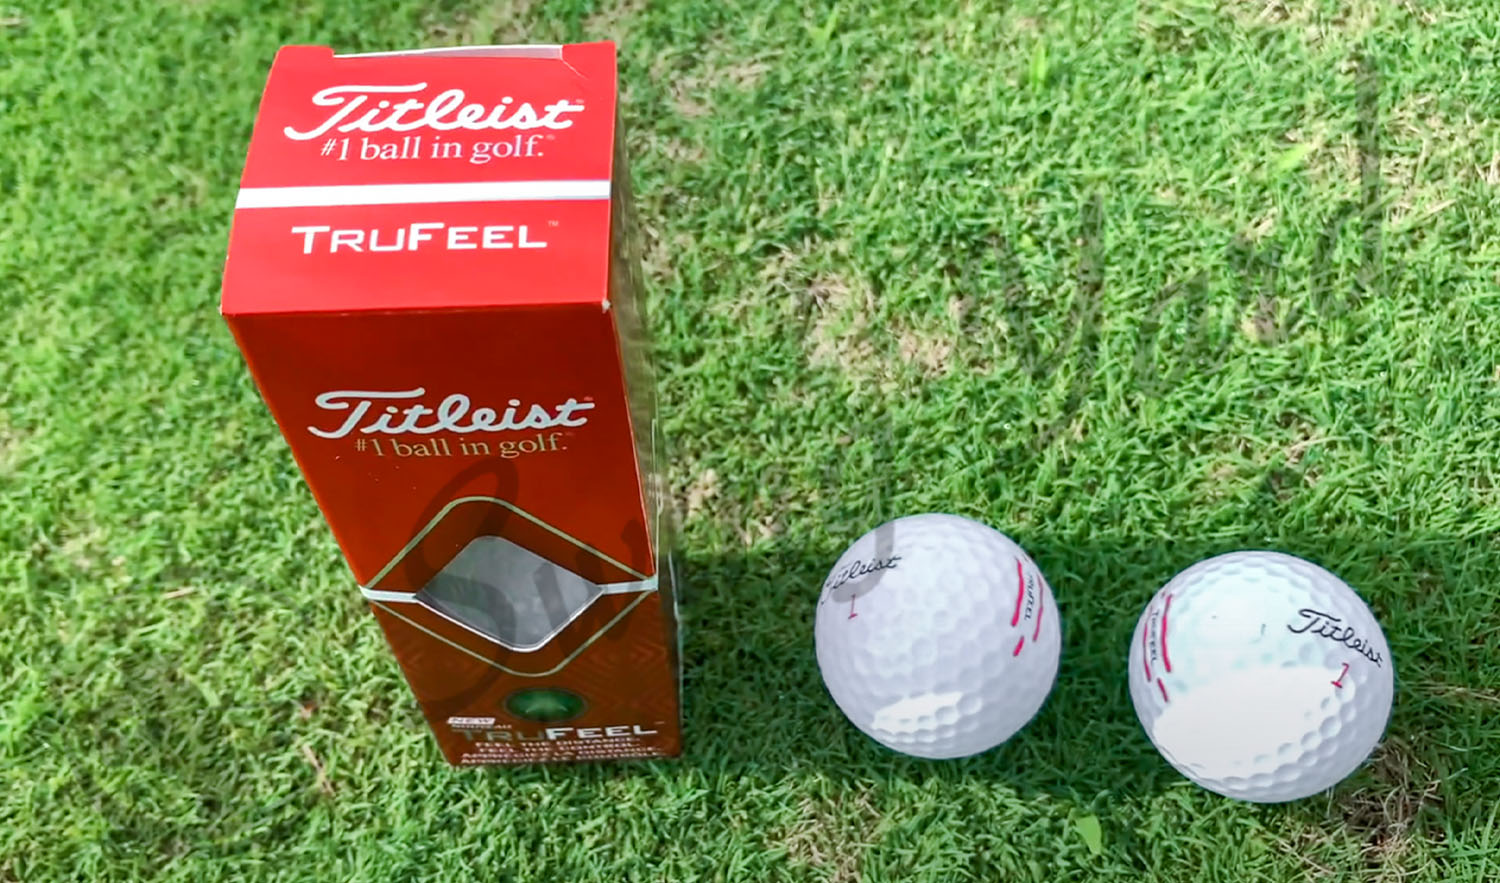 My Titleist TruFeel in the grass for testing